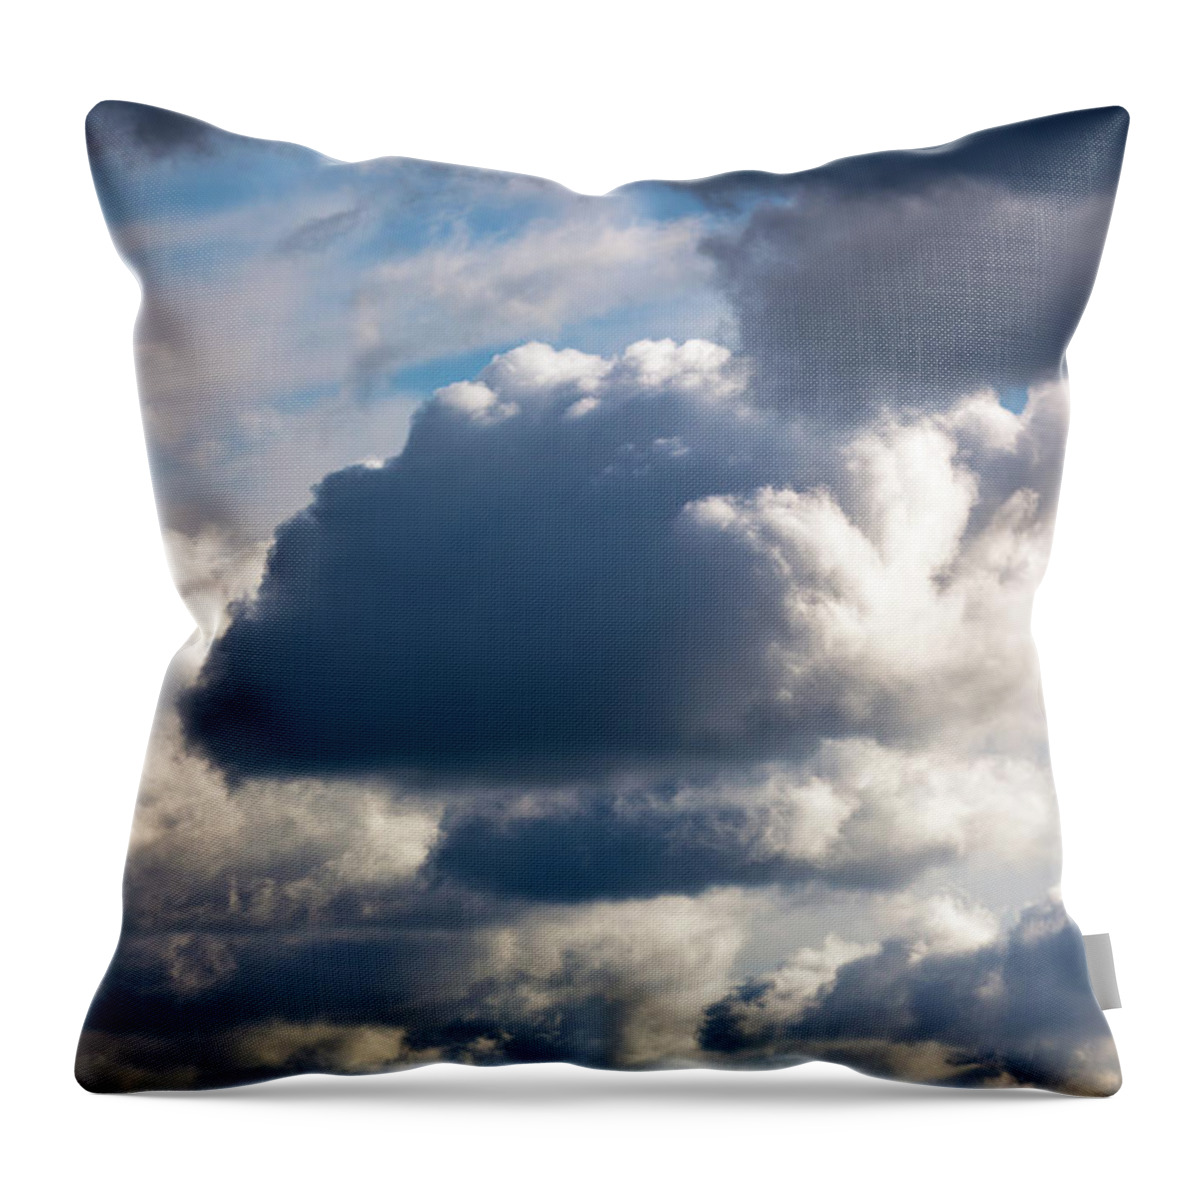 Scenics Throw Pillow featuring the photograph Cloudy Sky by Mordolff